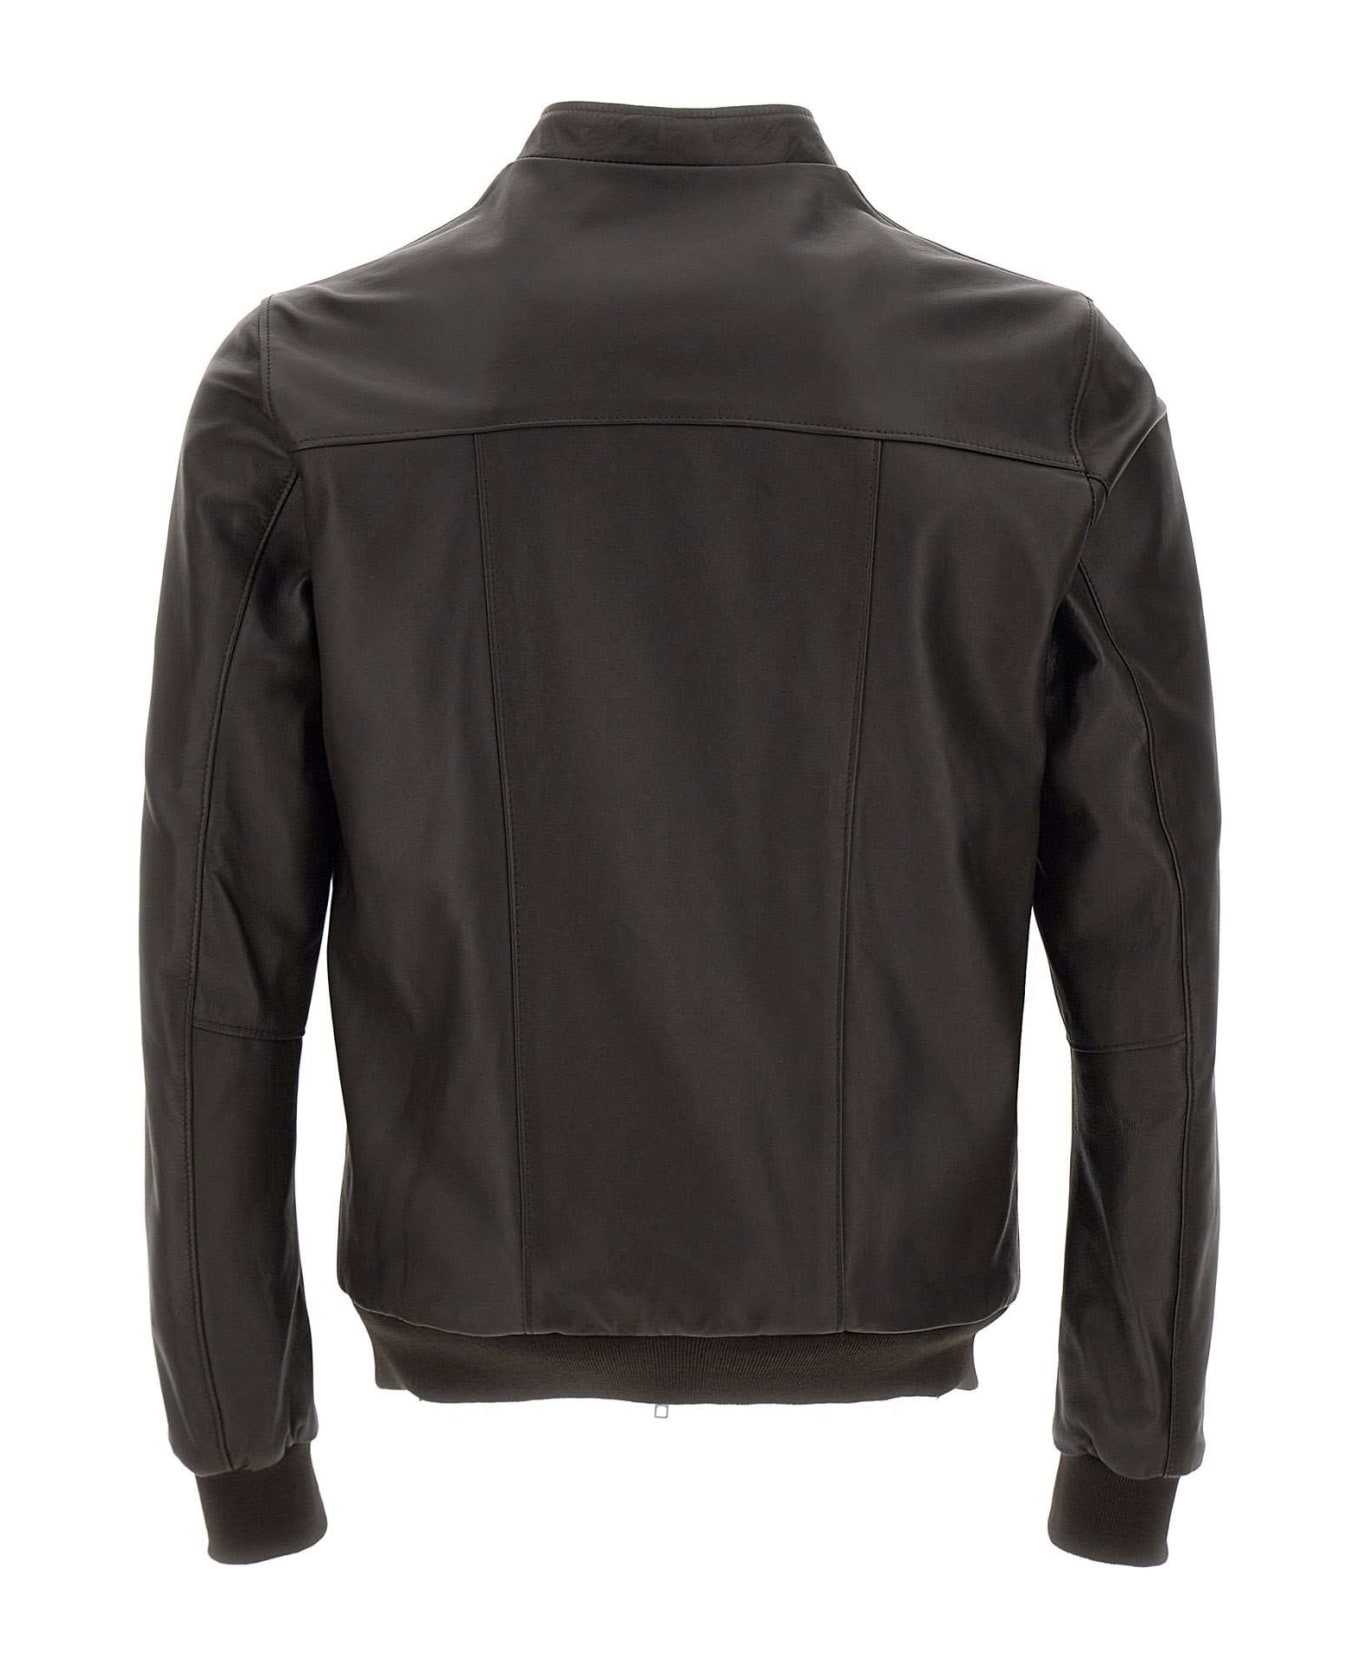 Mono "art Lucky" Leather Jacket - BROWN